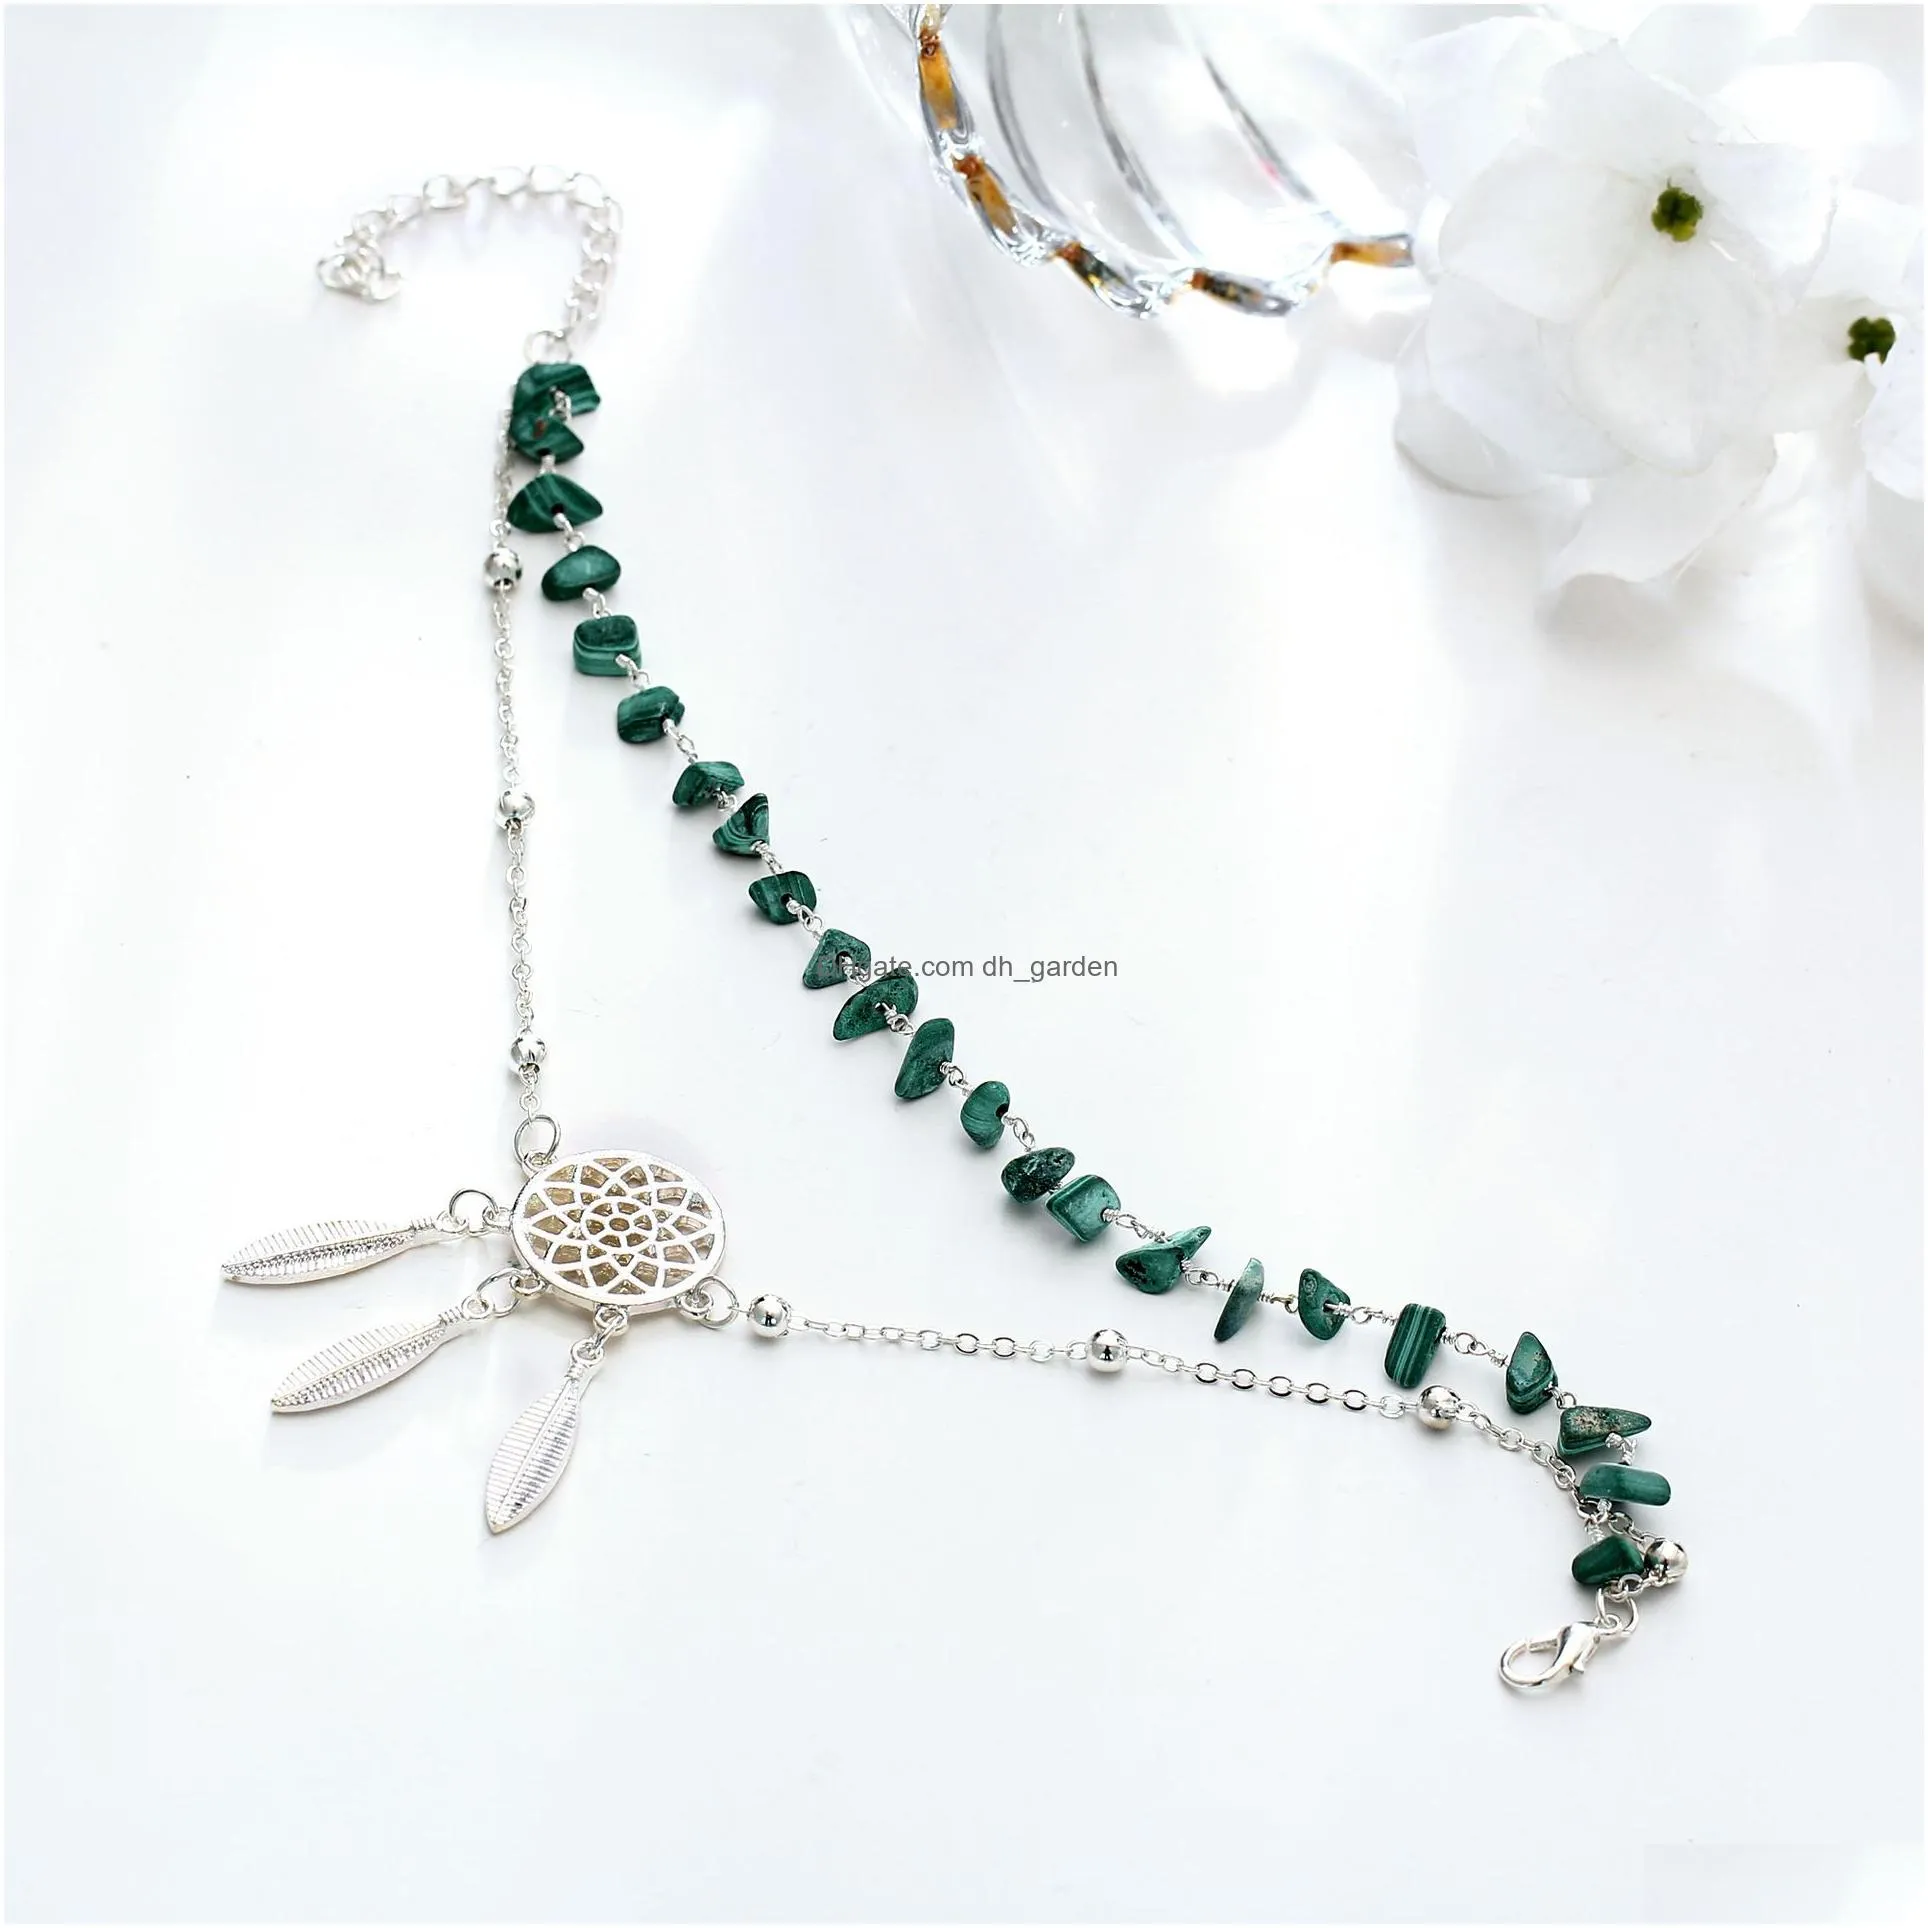 Anklets New Style Chic Women Boho Ethnic Irregarity Stone Anklets Dreamcatcher Foot Chain Beach Jewelry Fashion Leaf Feathe Dhgarden Dhei3